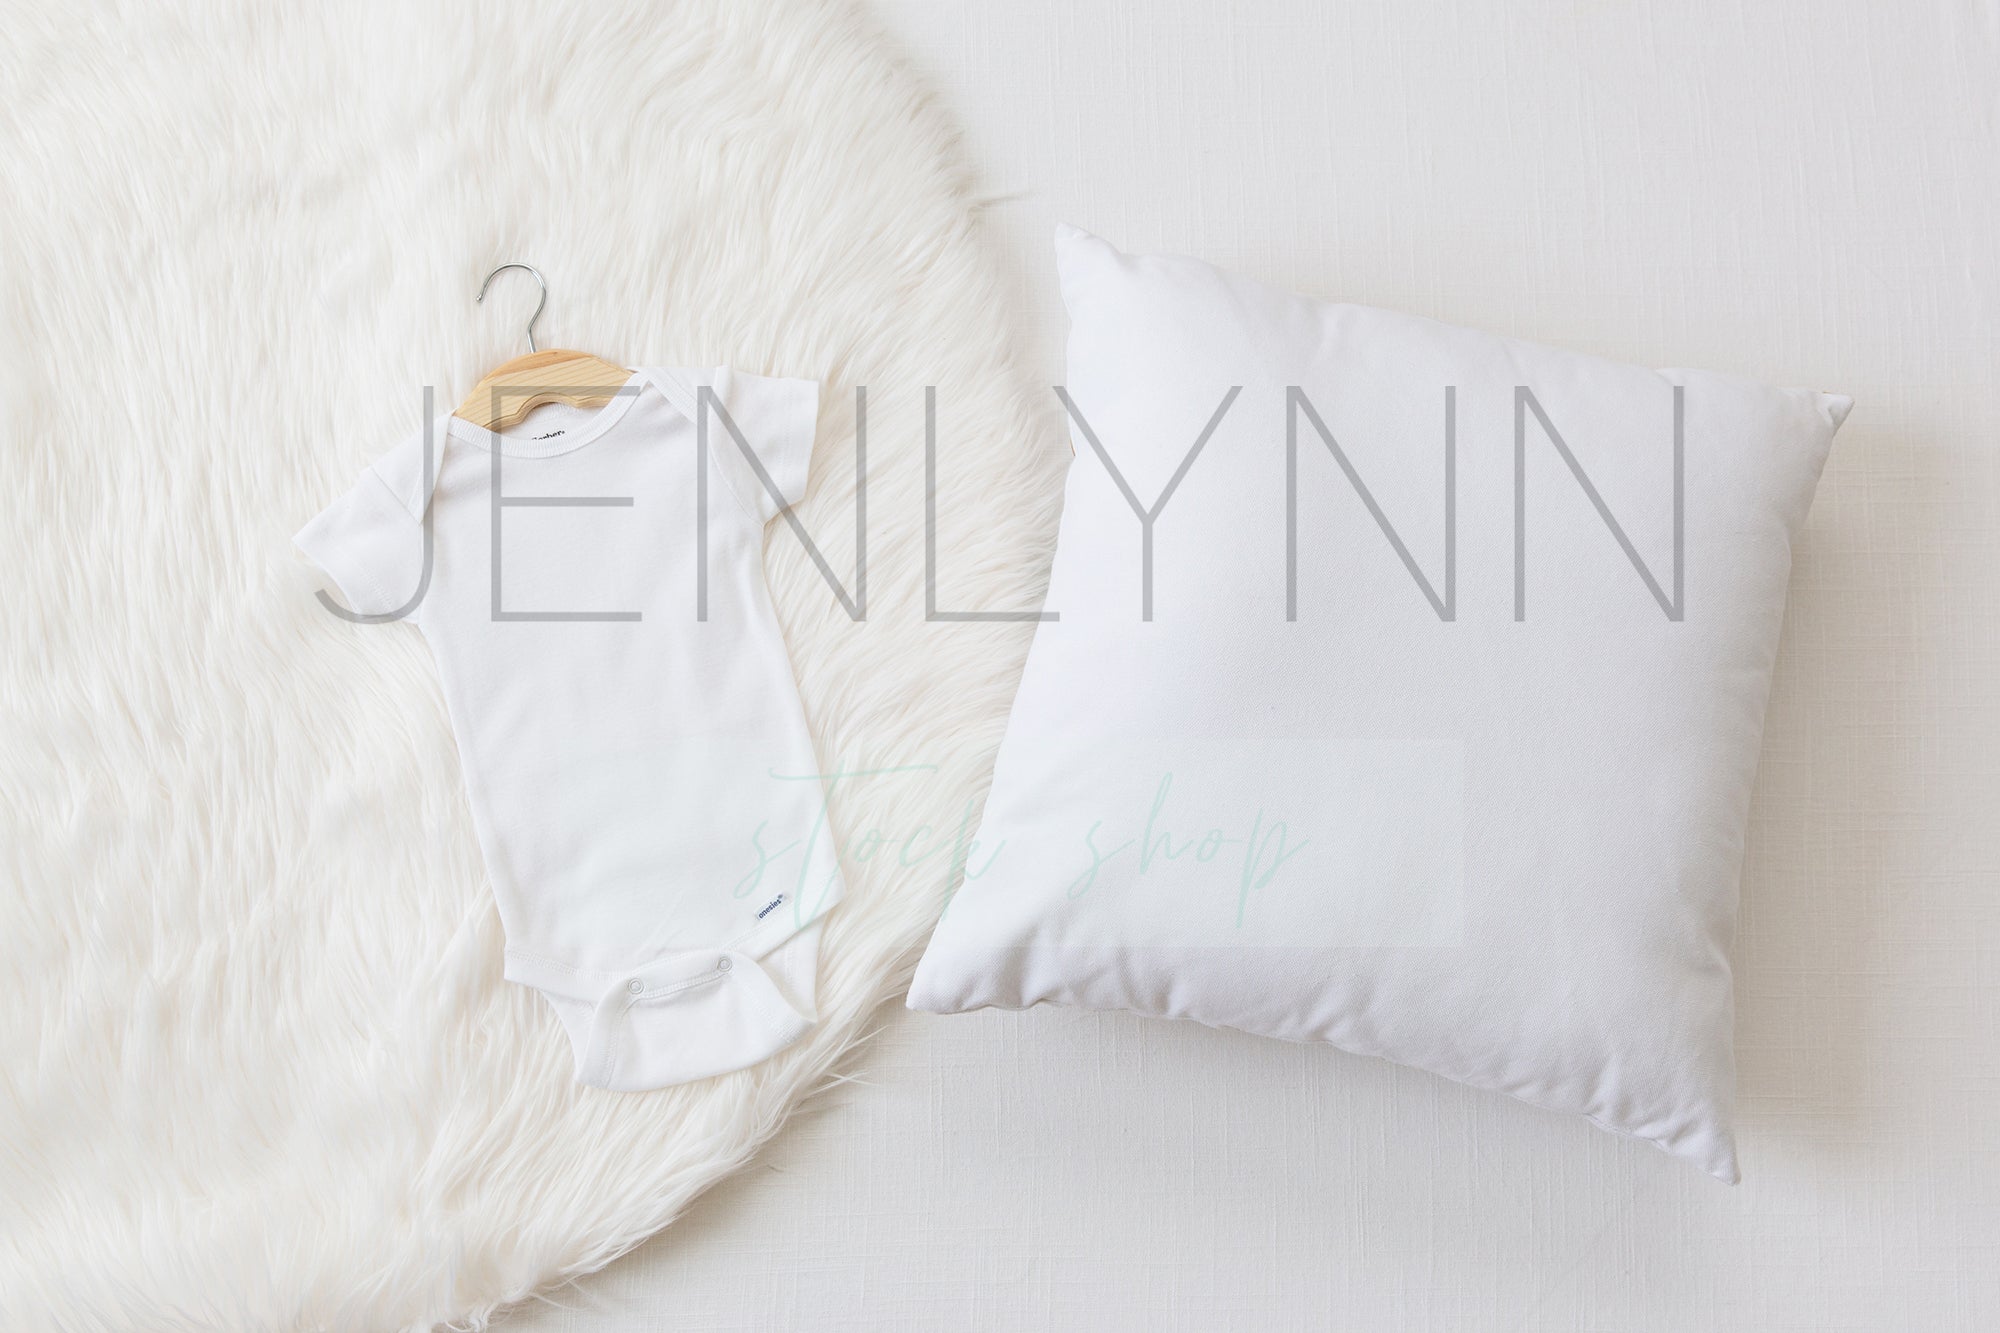 Onesie and Square Pillow Mockup #1 JPG